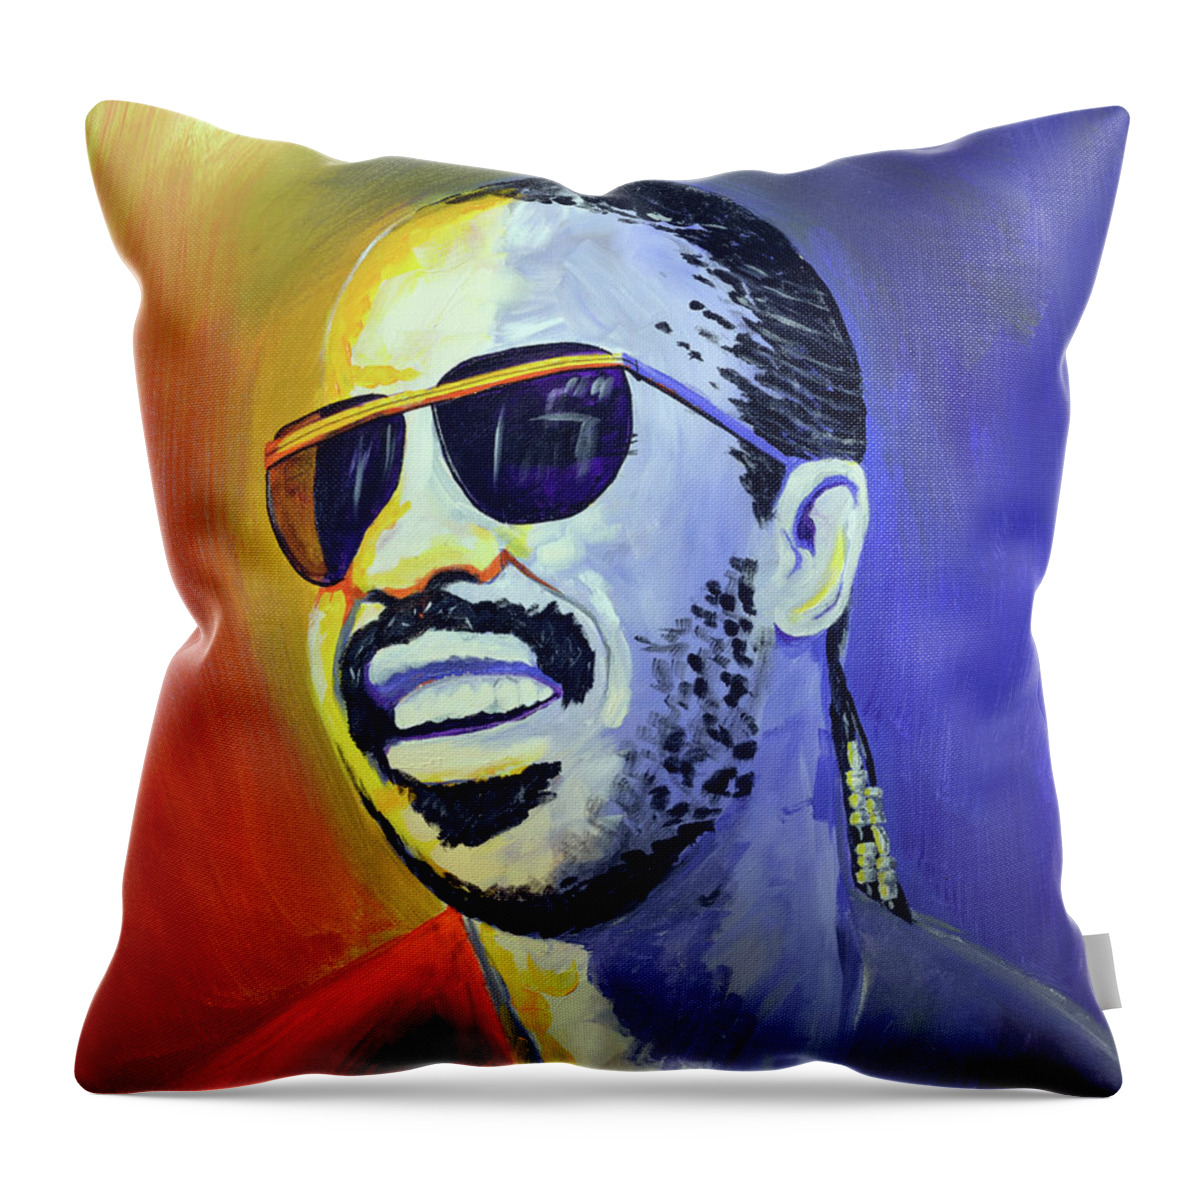 Stevie Throw Pillow featuring the painting Stevie Wonder by Lee Winter